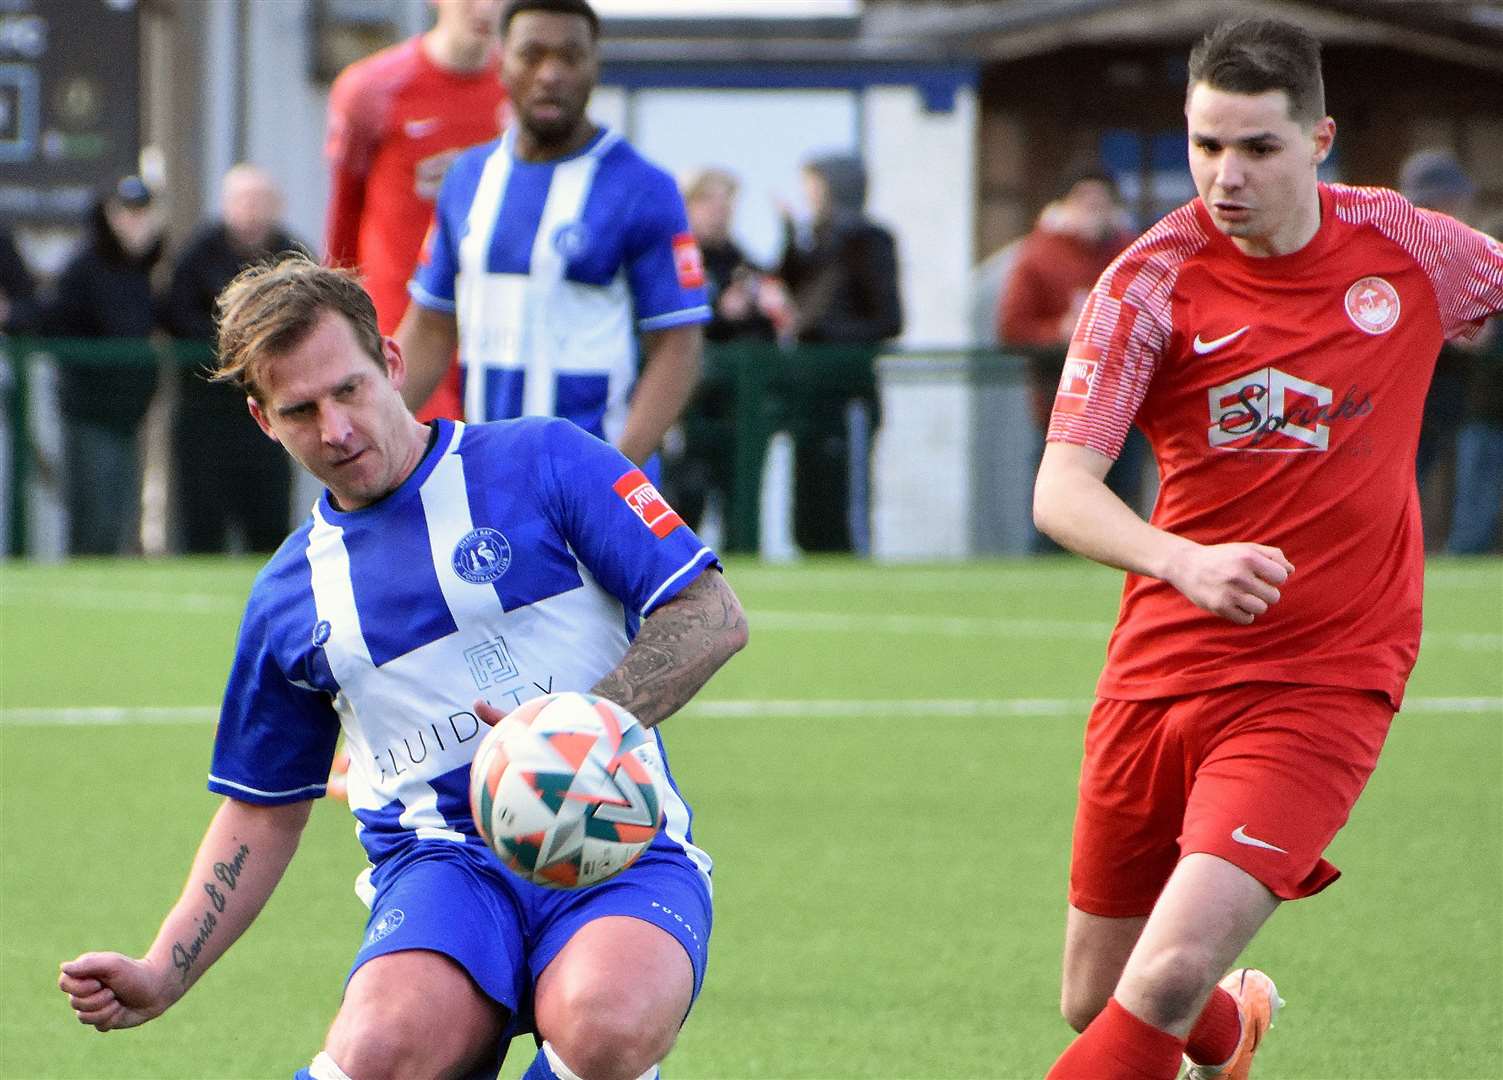 Herne Bay midfielder Danny Walder is closed down by Hythe forward Jake Embery in Bay’s 2-1 defeat at Winch’s Field on Saturday. Picture: Randolph File